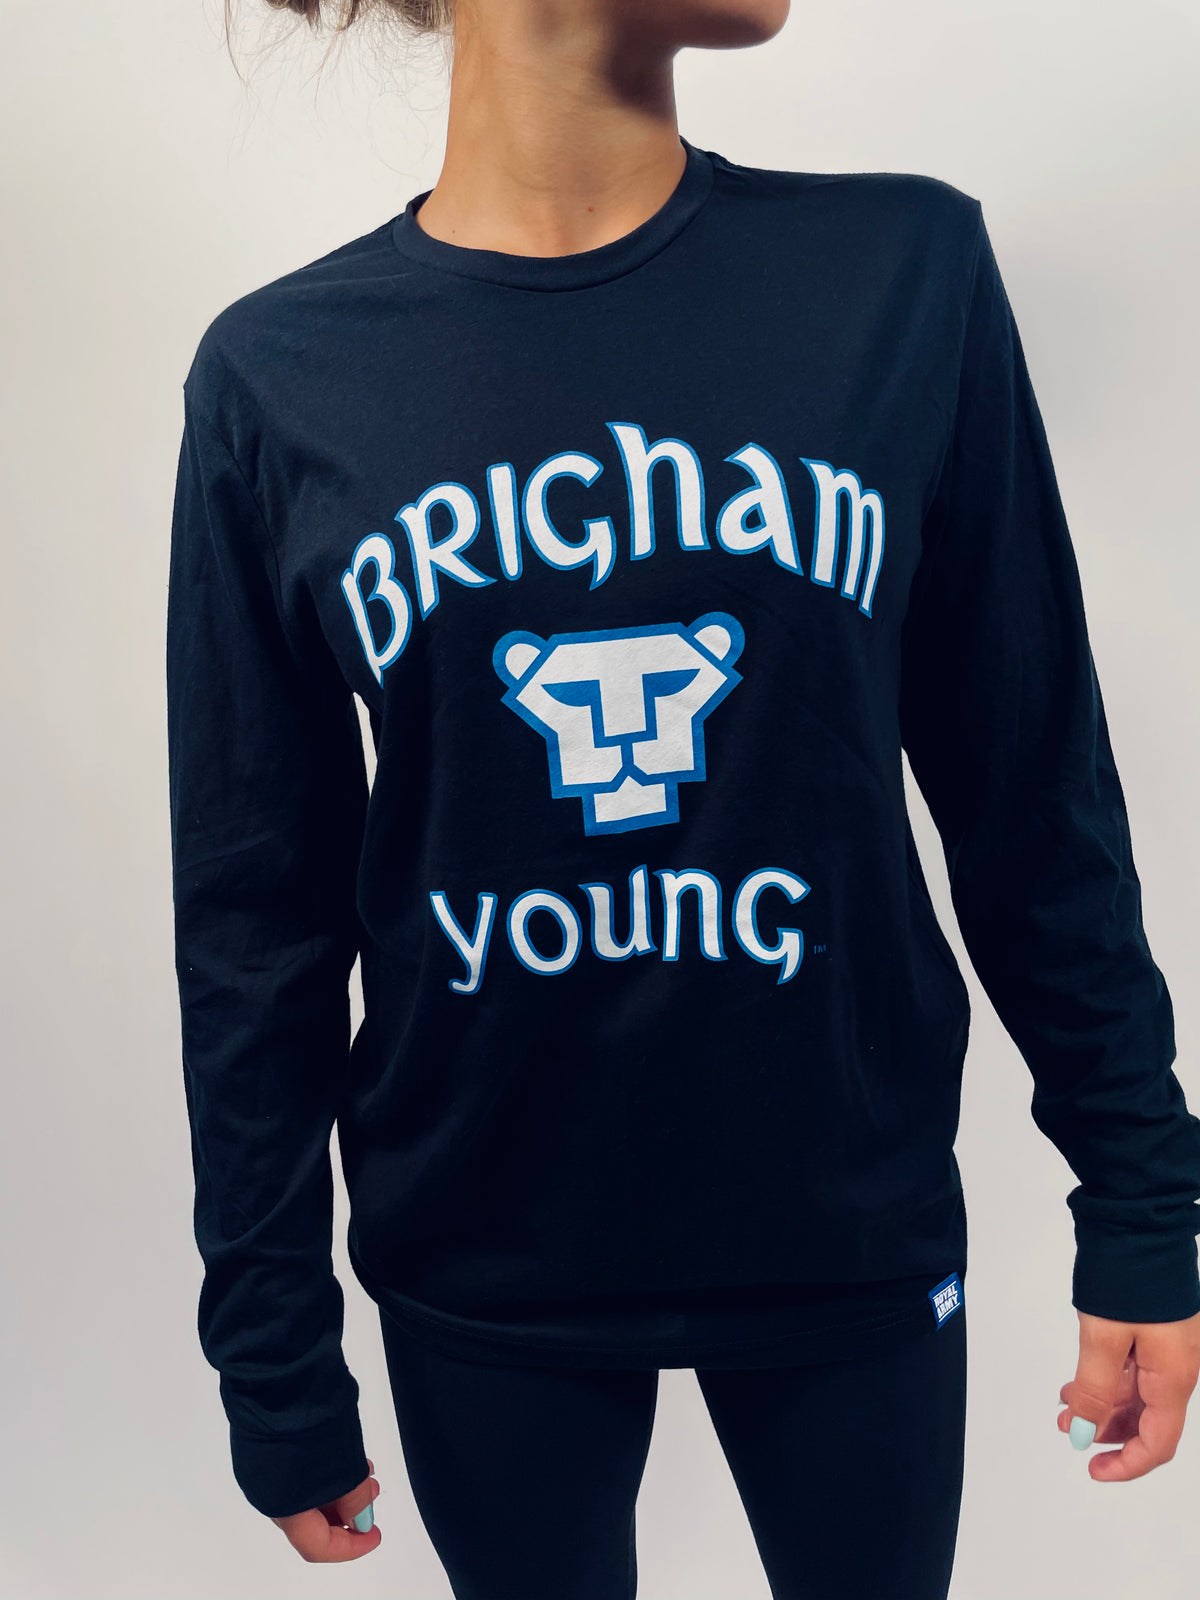 Black Vintage Cougar and Brigham Young Script Long-Sleeve T-Shirt